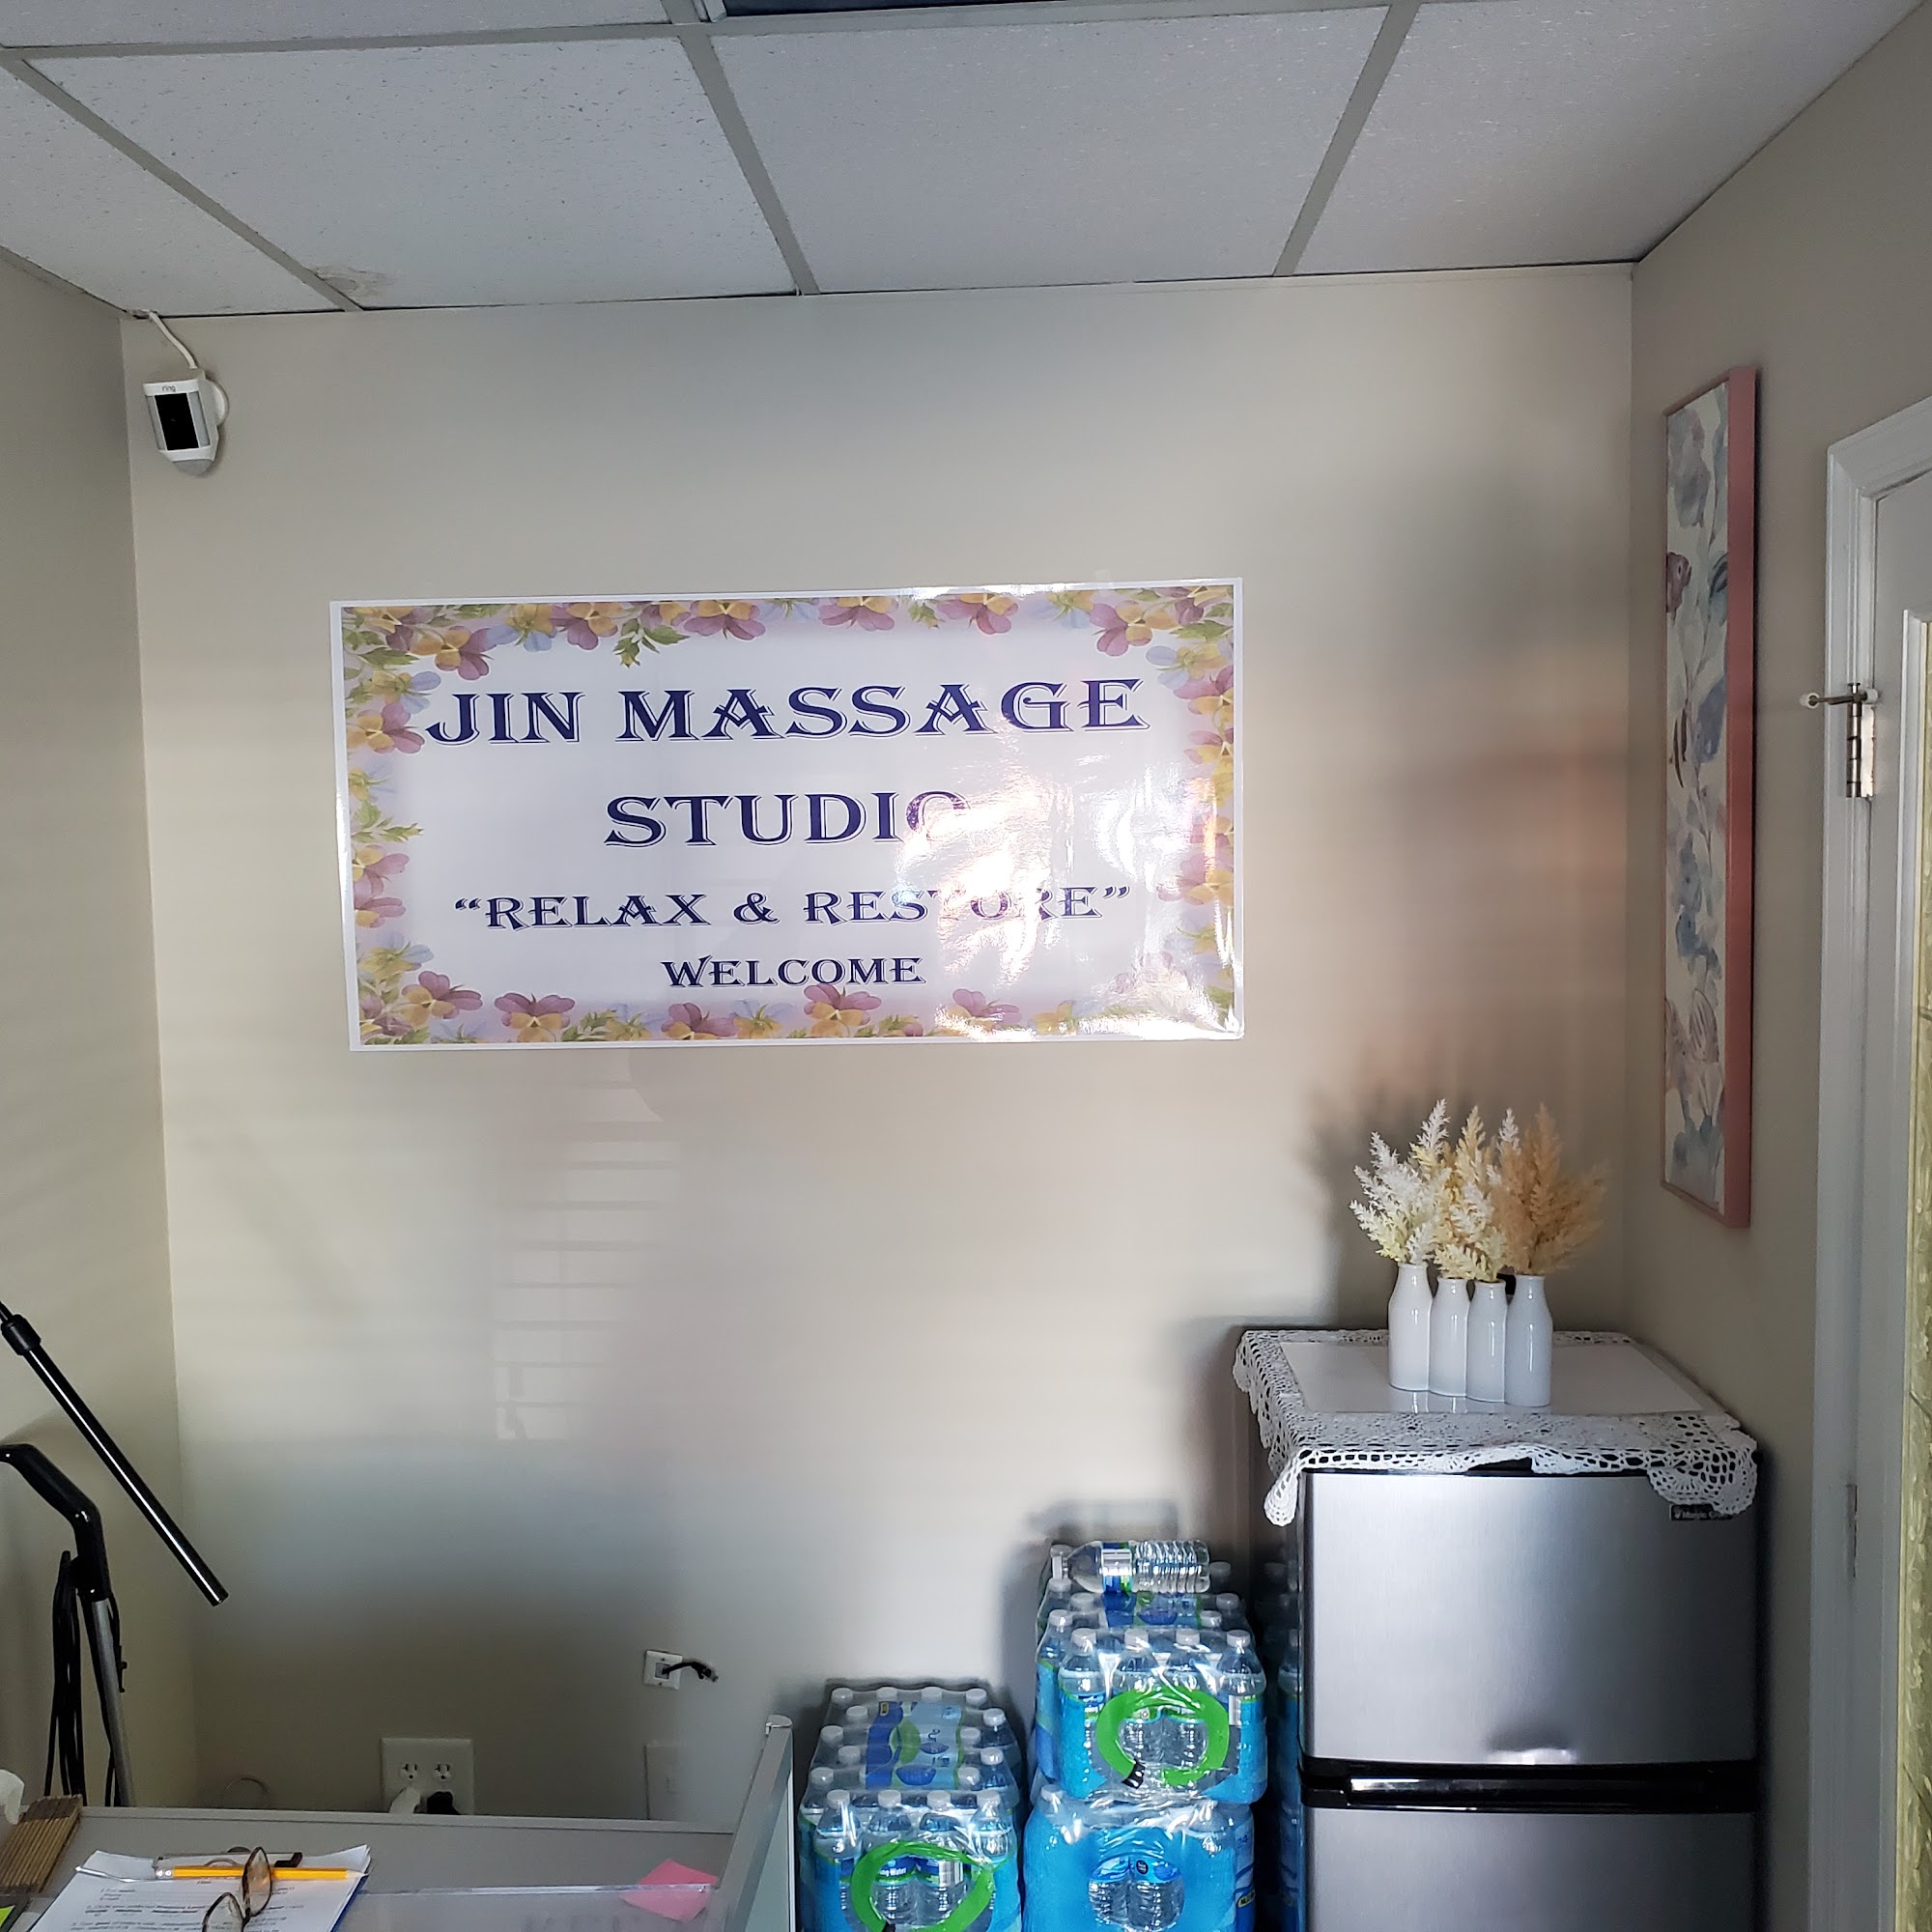 Jin Massage Studio 1507 Ritchie Hwy Suite 104, Arnold Maryland 21012